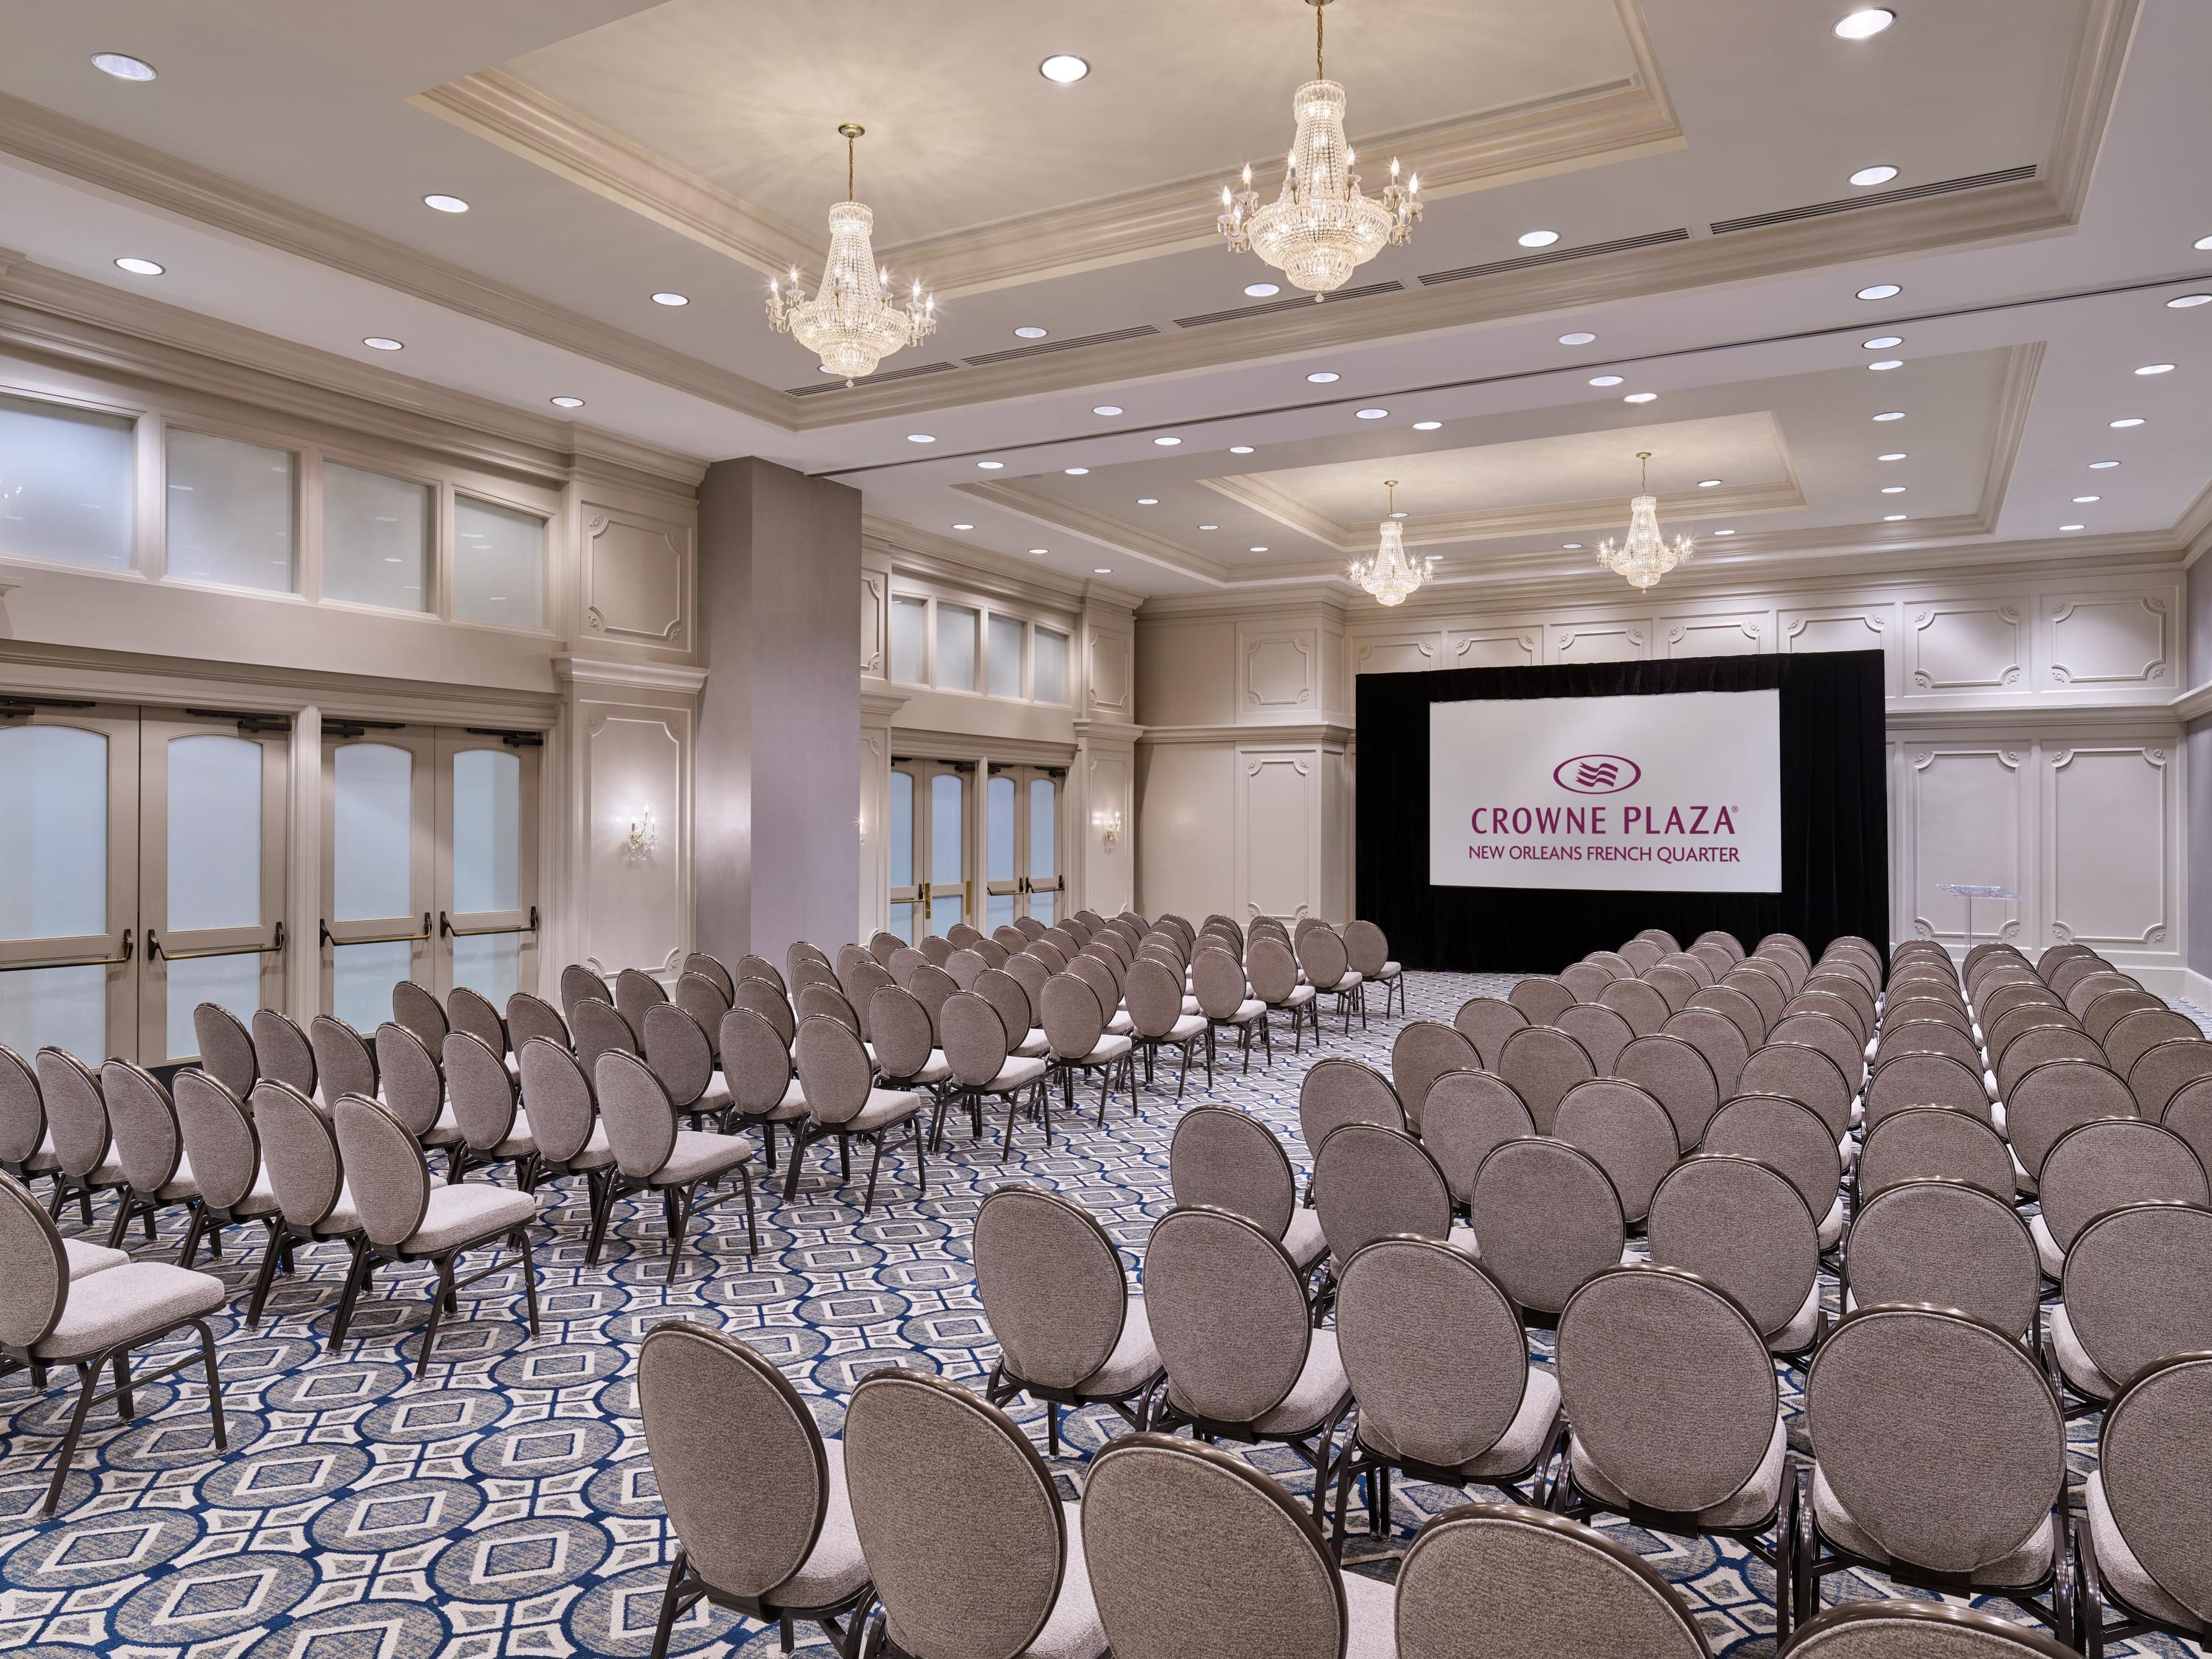 From conferences to weddings, host your next signature event in our hotel's fantastic meeting space and rooms. With 32,000 square feet and three ballrooms, our flexible space is outfitted with audiovisual technology ideal for any event. Additionally, our hotel's Meetings Director will help you plan the perfect event for your guests.
